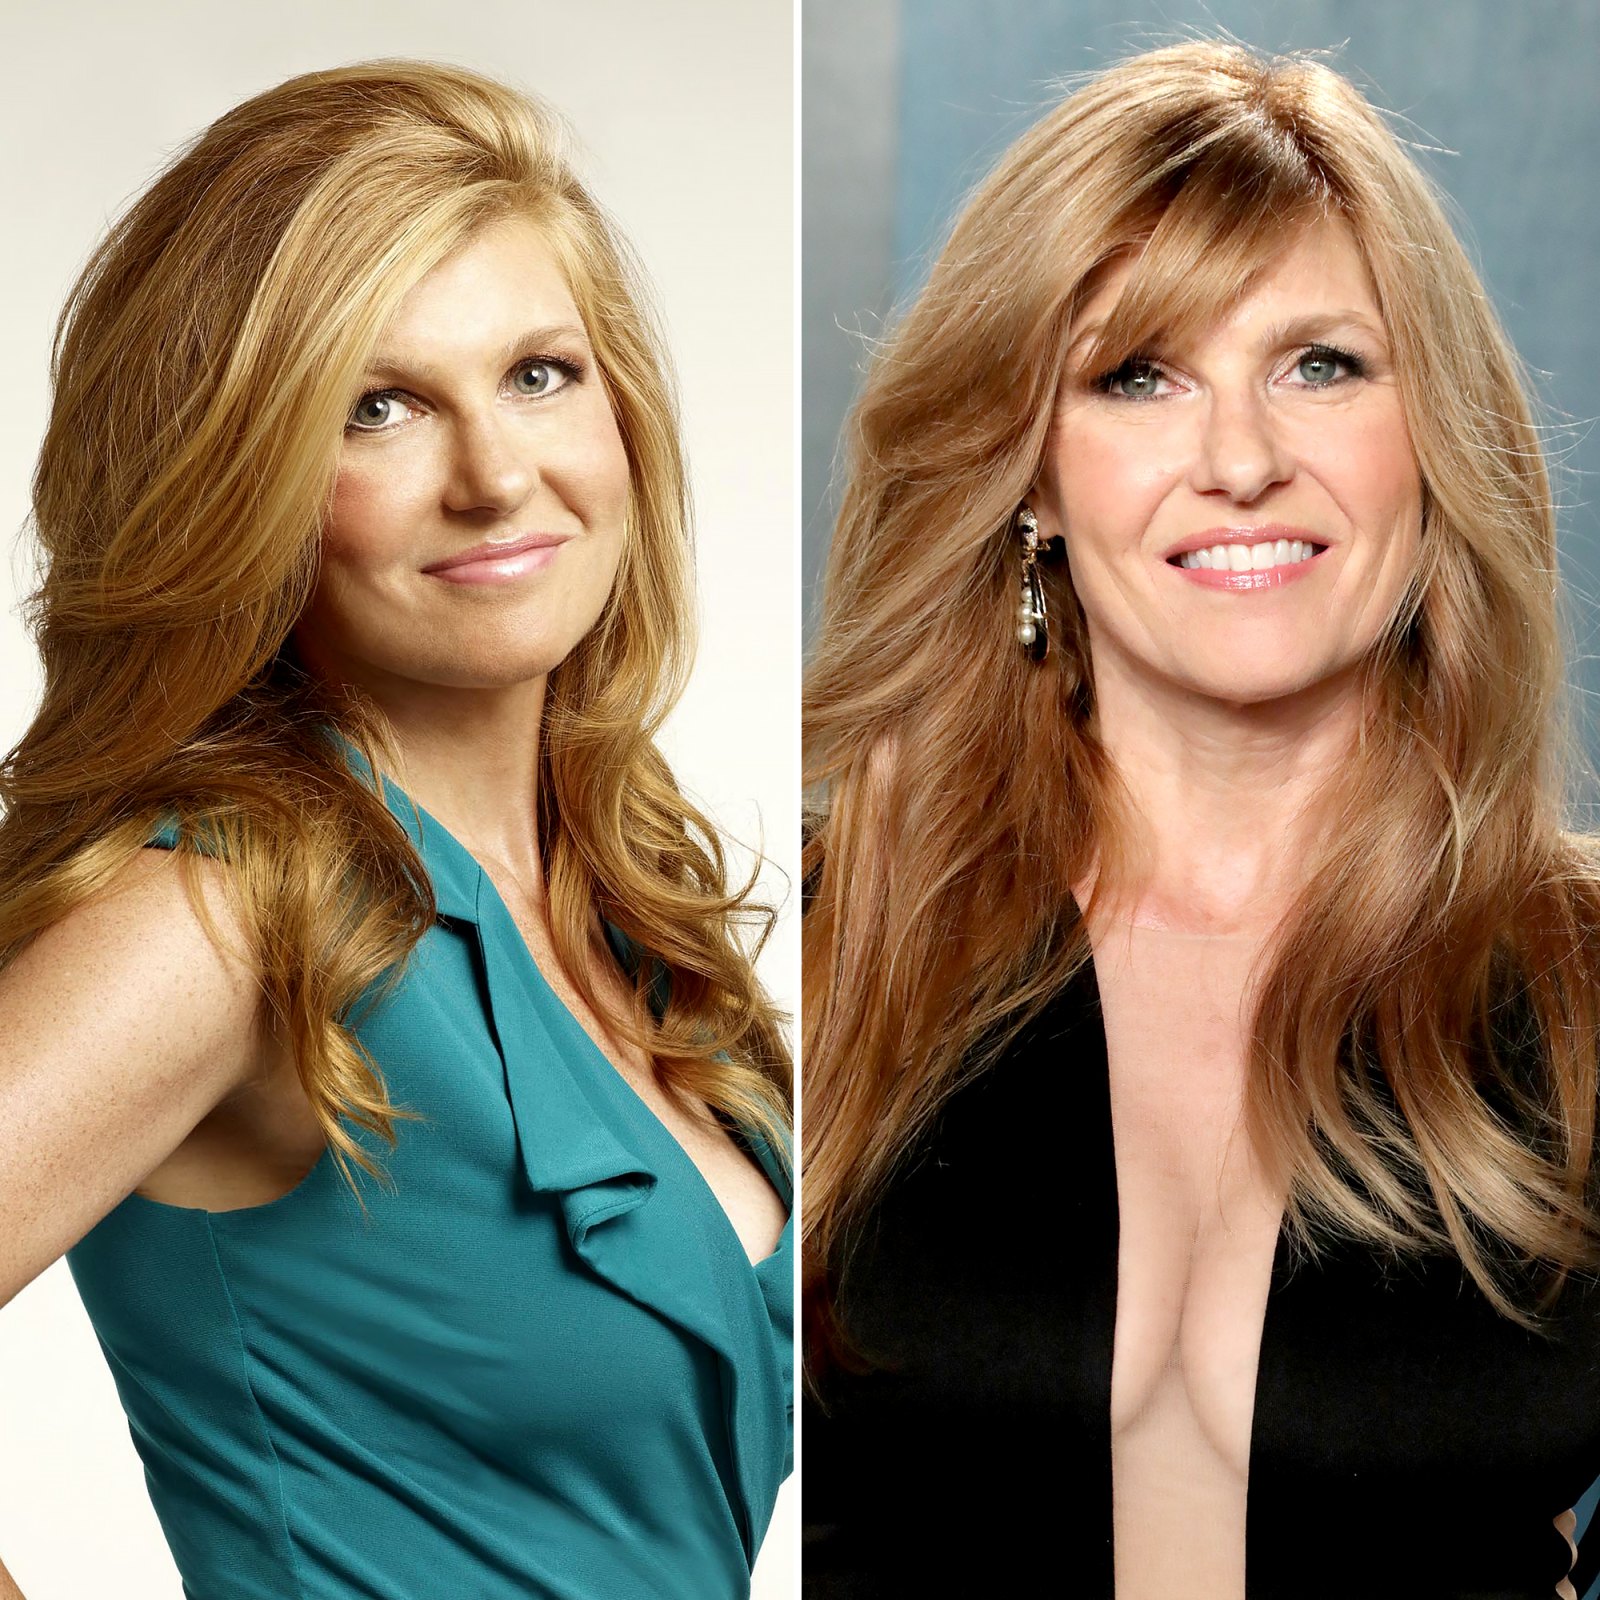 Connie Britton Friday Night Lights Where Are They Now